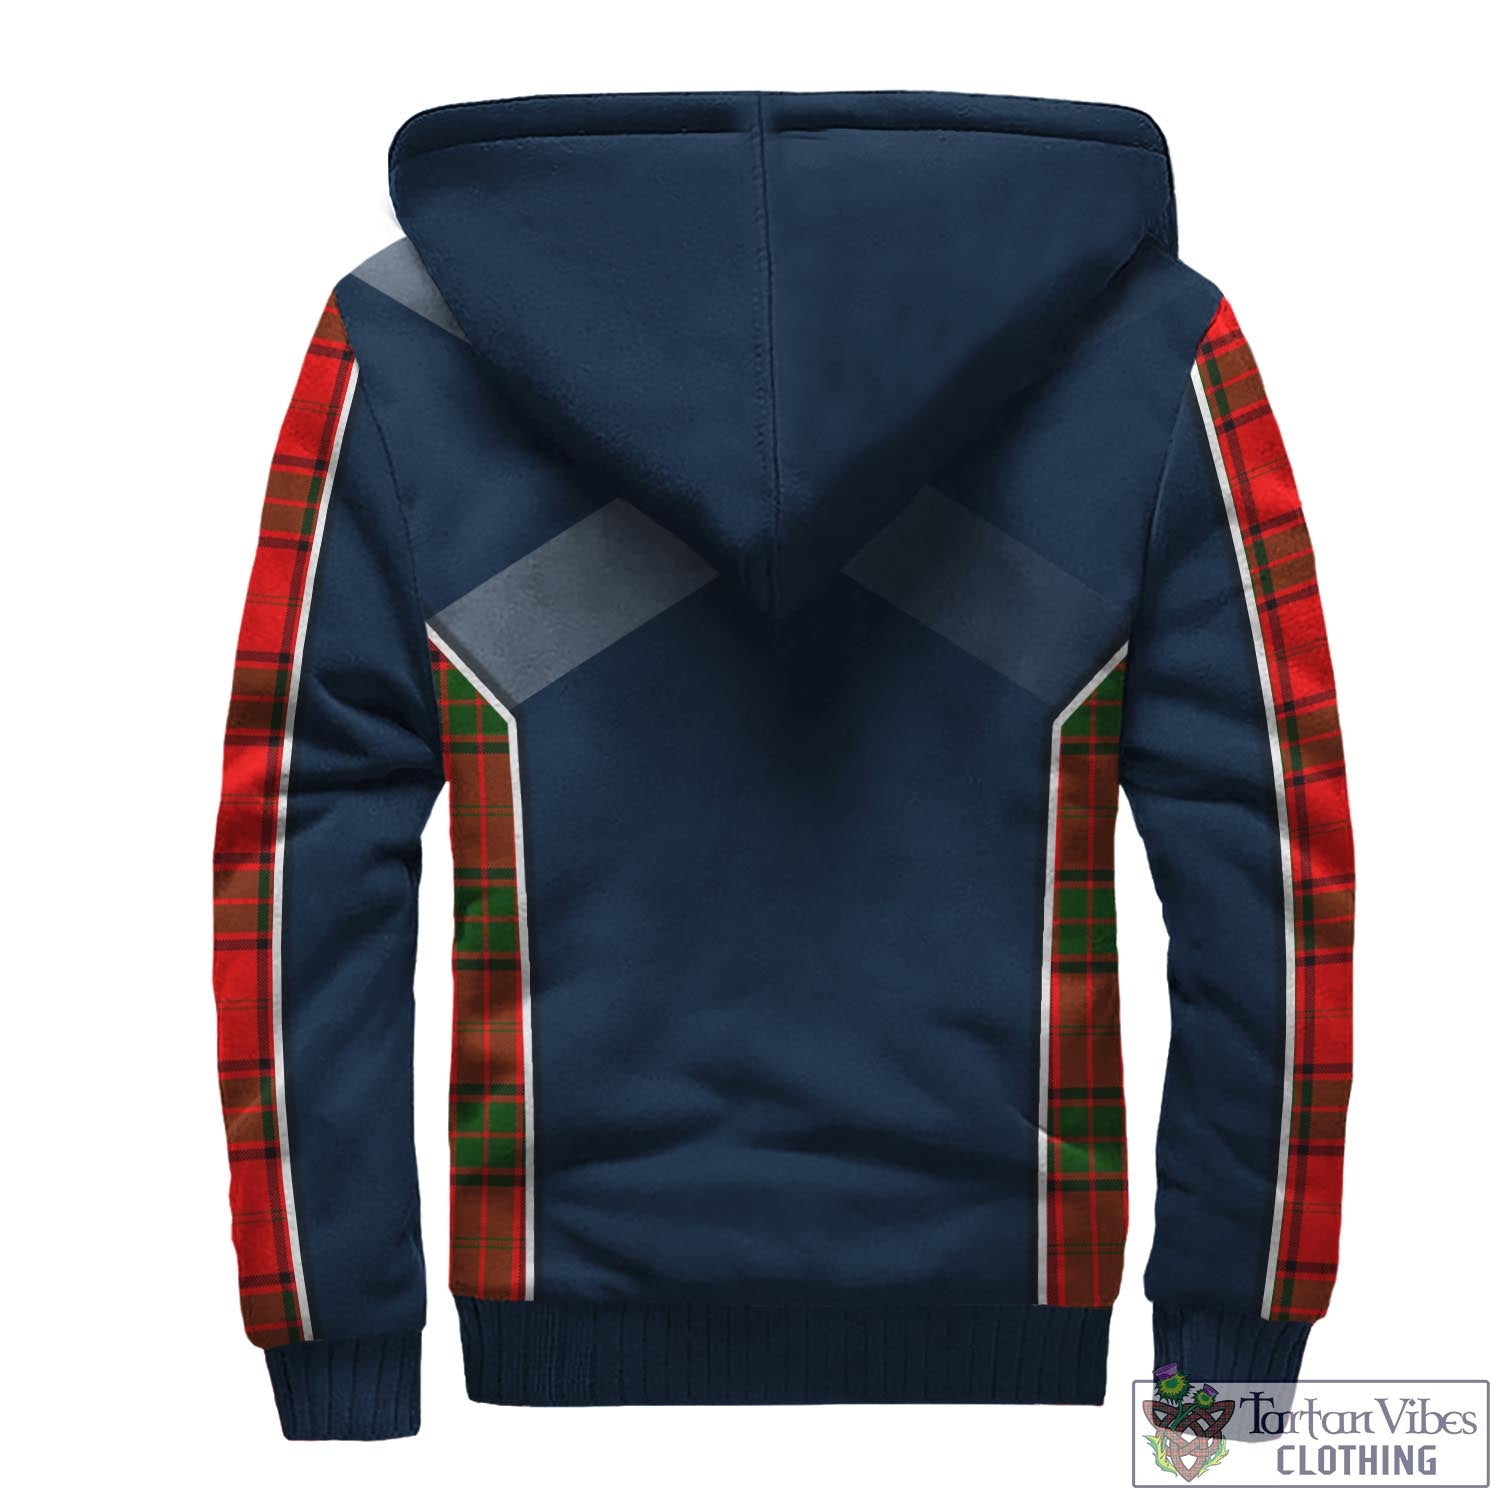 Tartan Vibes Clothing Maxtone Tartan Sherpa Hoodie with Family Crest and Lion Rampant Vibes Sport Style